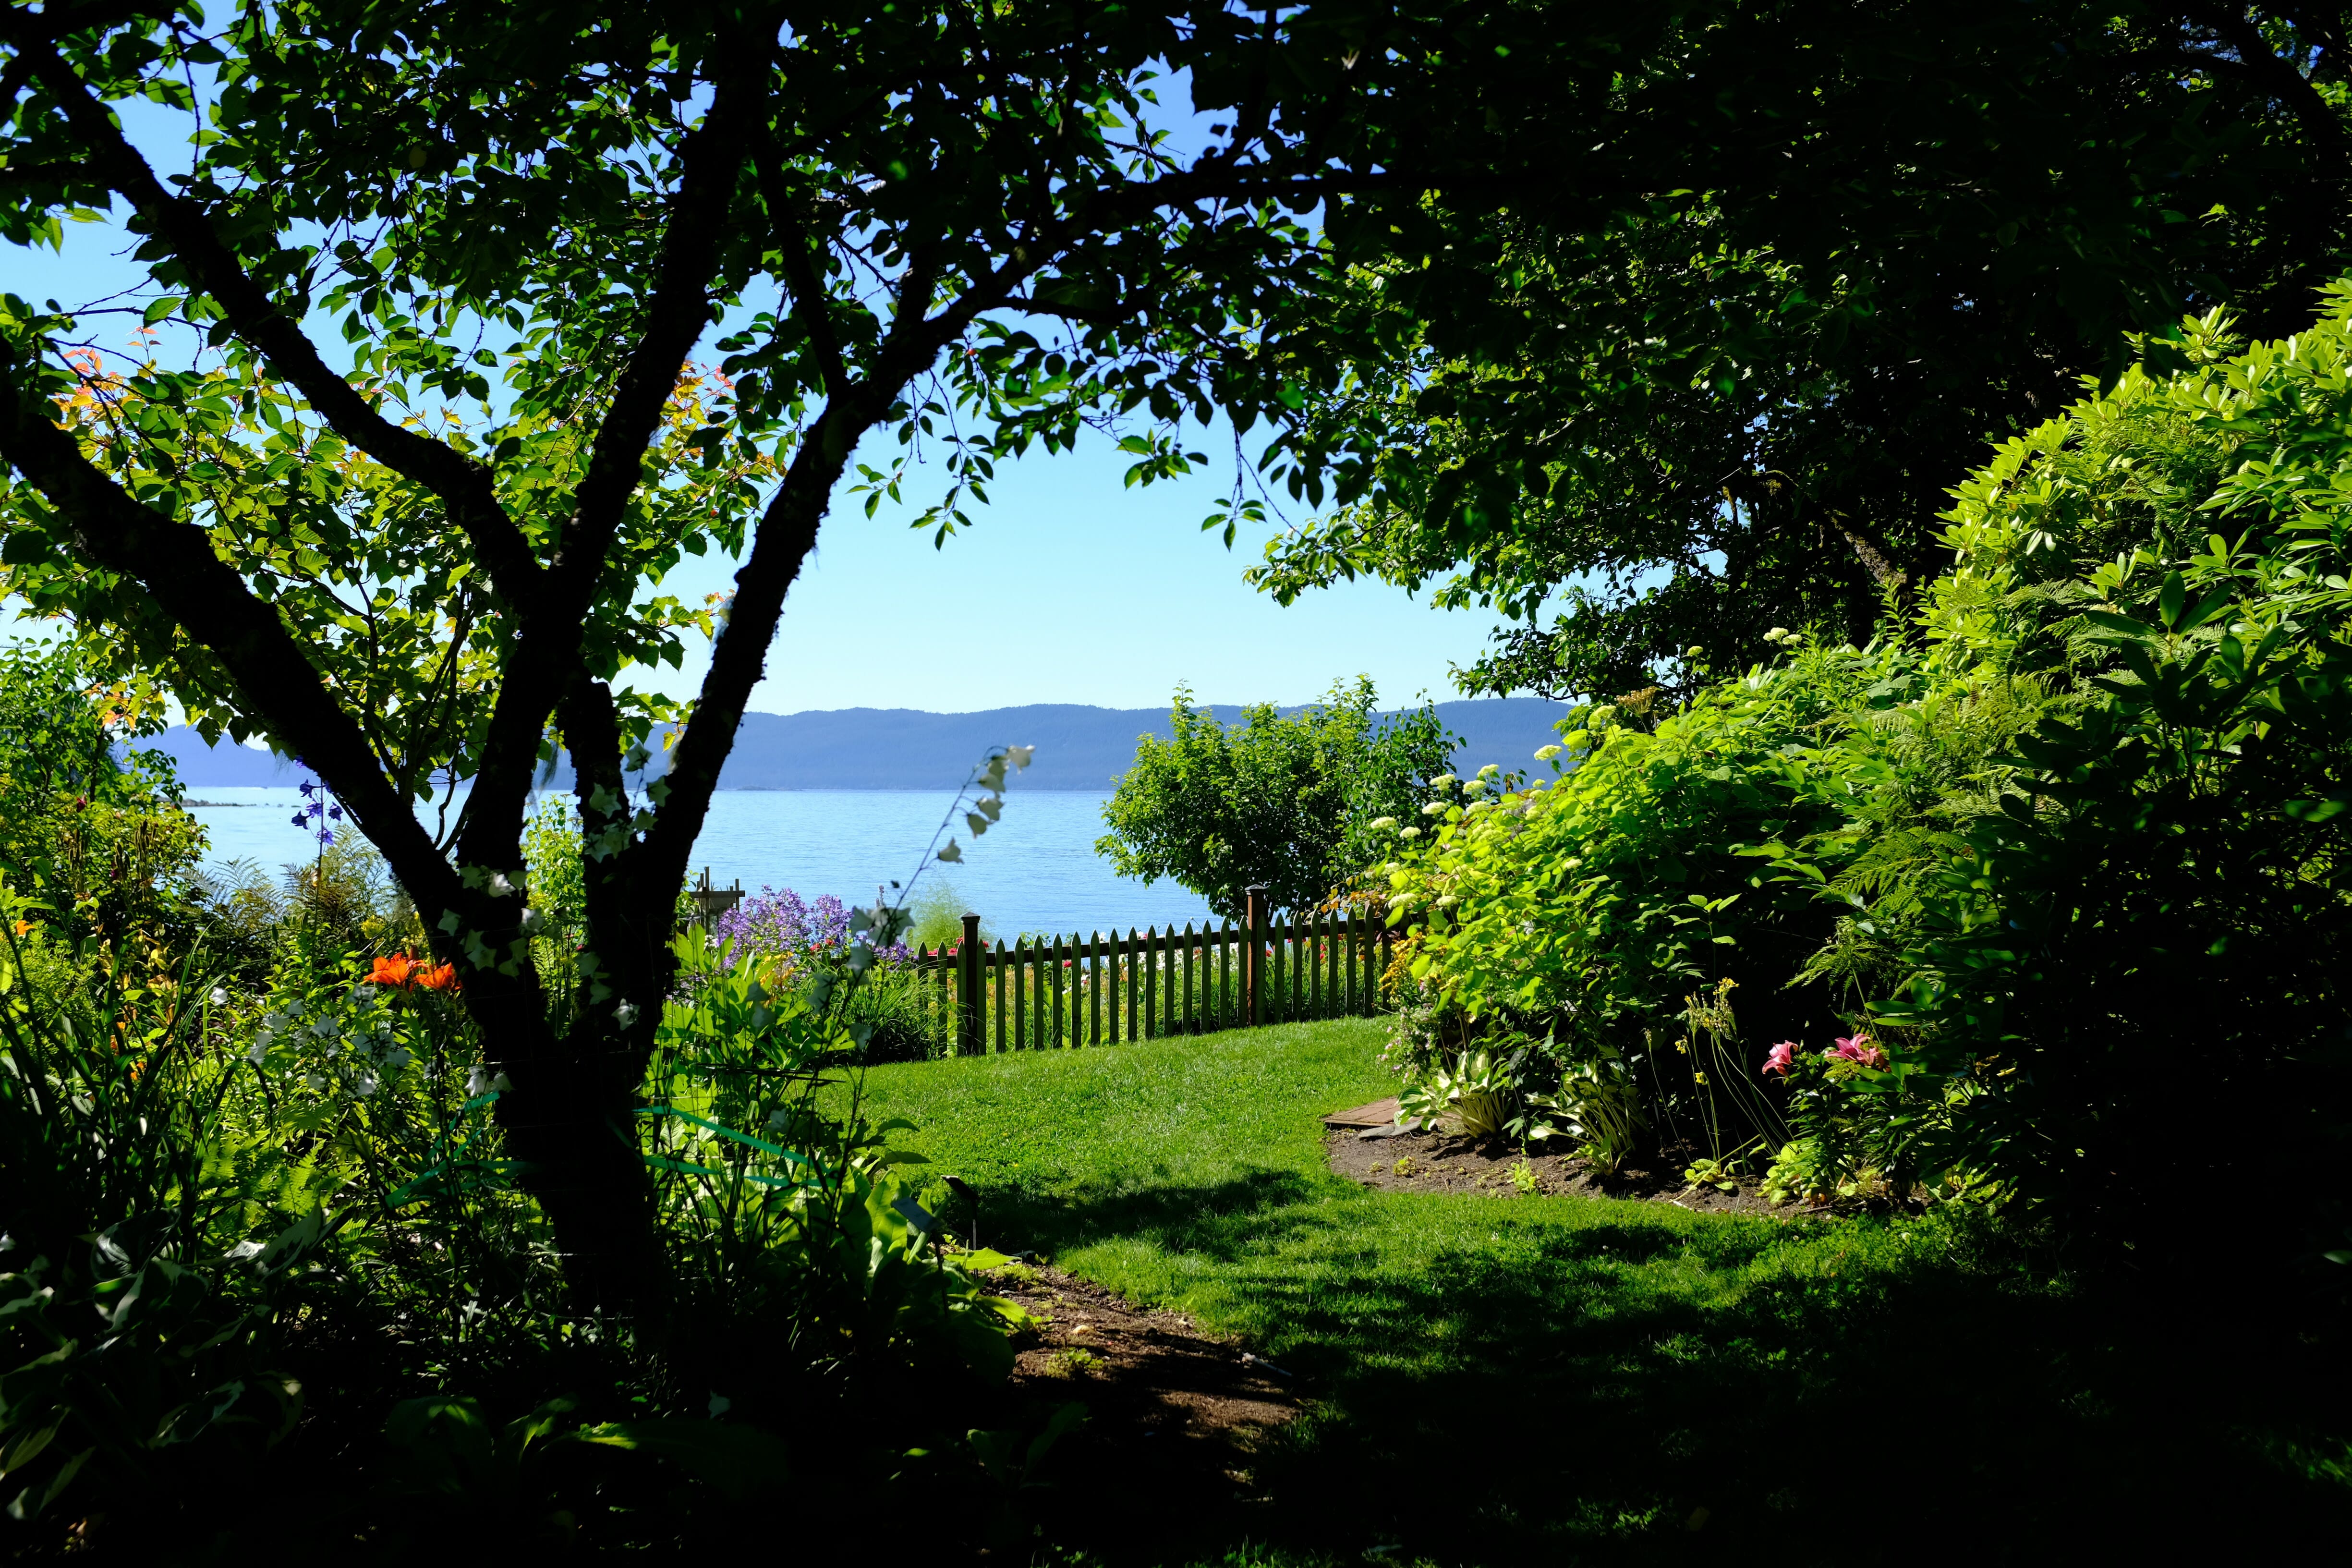 Shadow-framed view of pathway with ocean in the distance - Arboretum